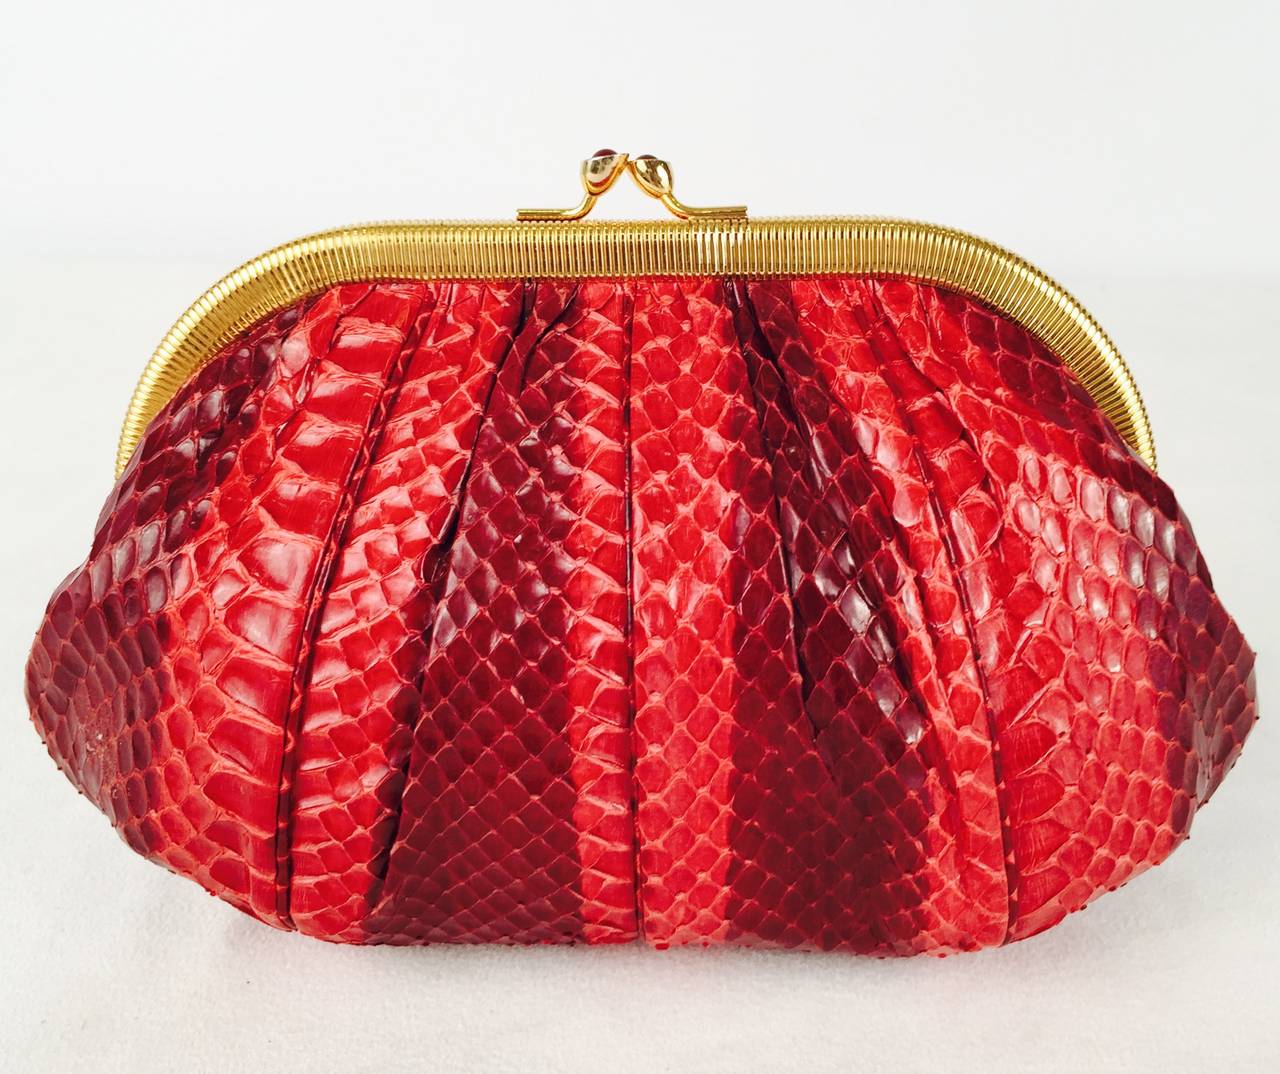 Judith Leiber Snakeskin Evening Bag is highly desired by all collectors of Judith Leiber! Features butter-soft snakeskin in luxurious bands of burgundy and red berry.  Easily converts from clutch to shoulder bag with minimal effort!  Gathered design